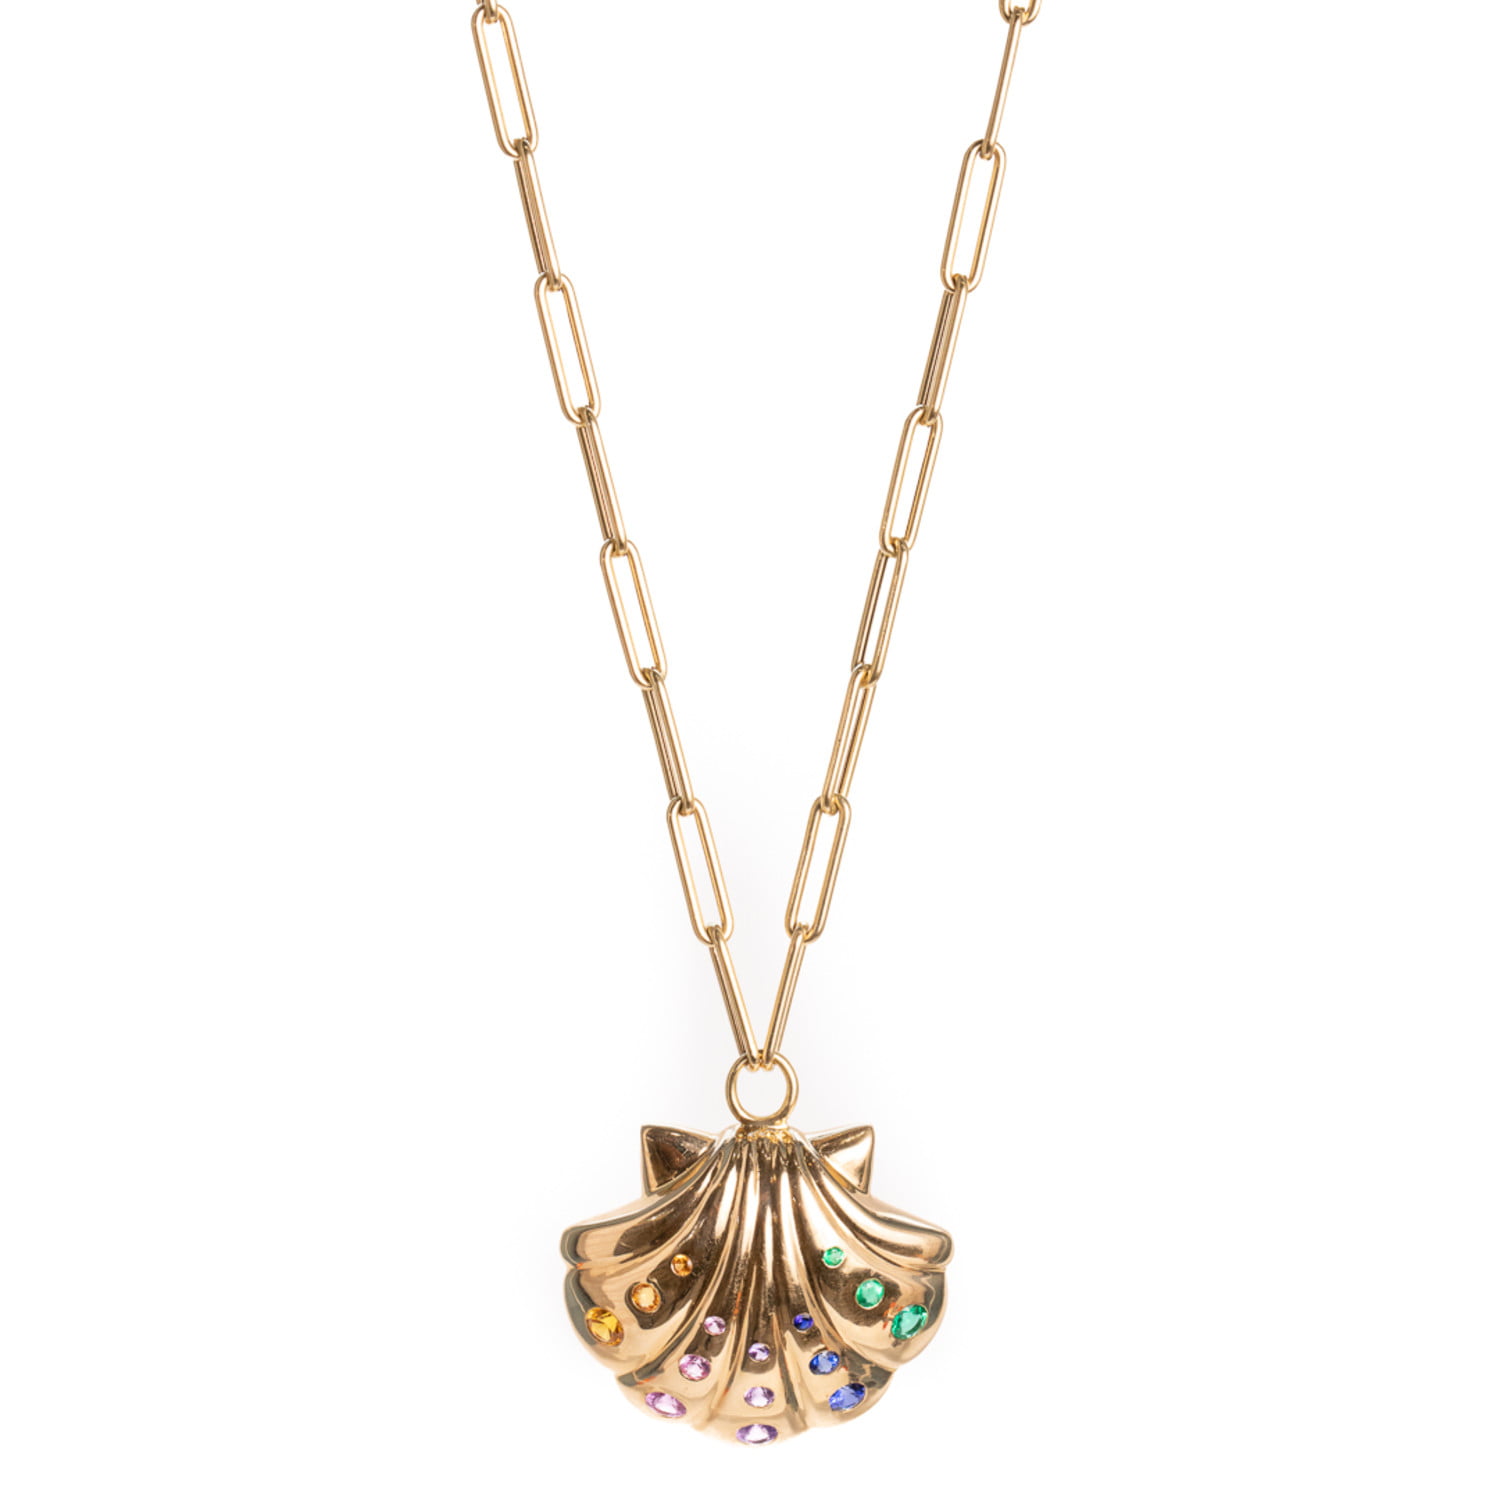 BRENT NEALE SMALL MARIANNE NECKLACE - Capitol